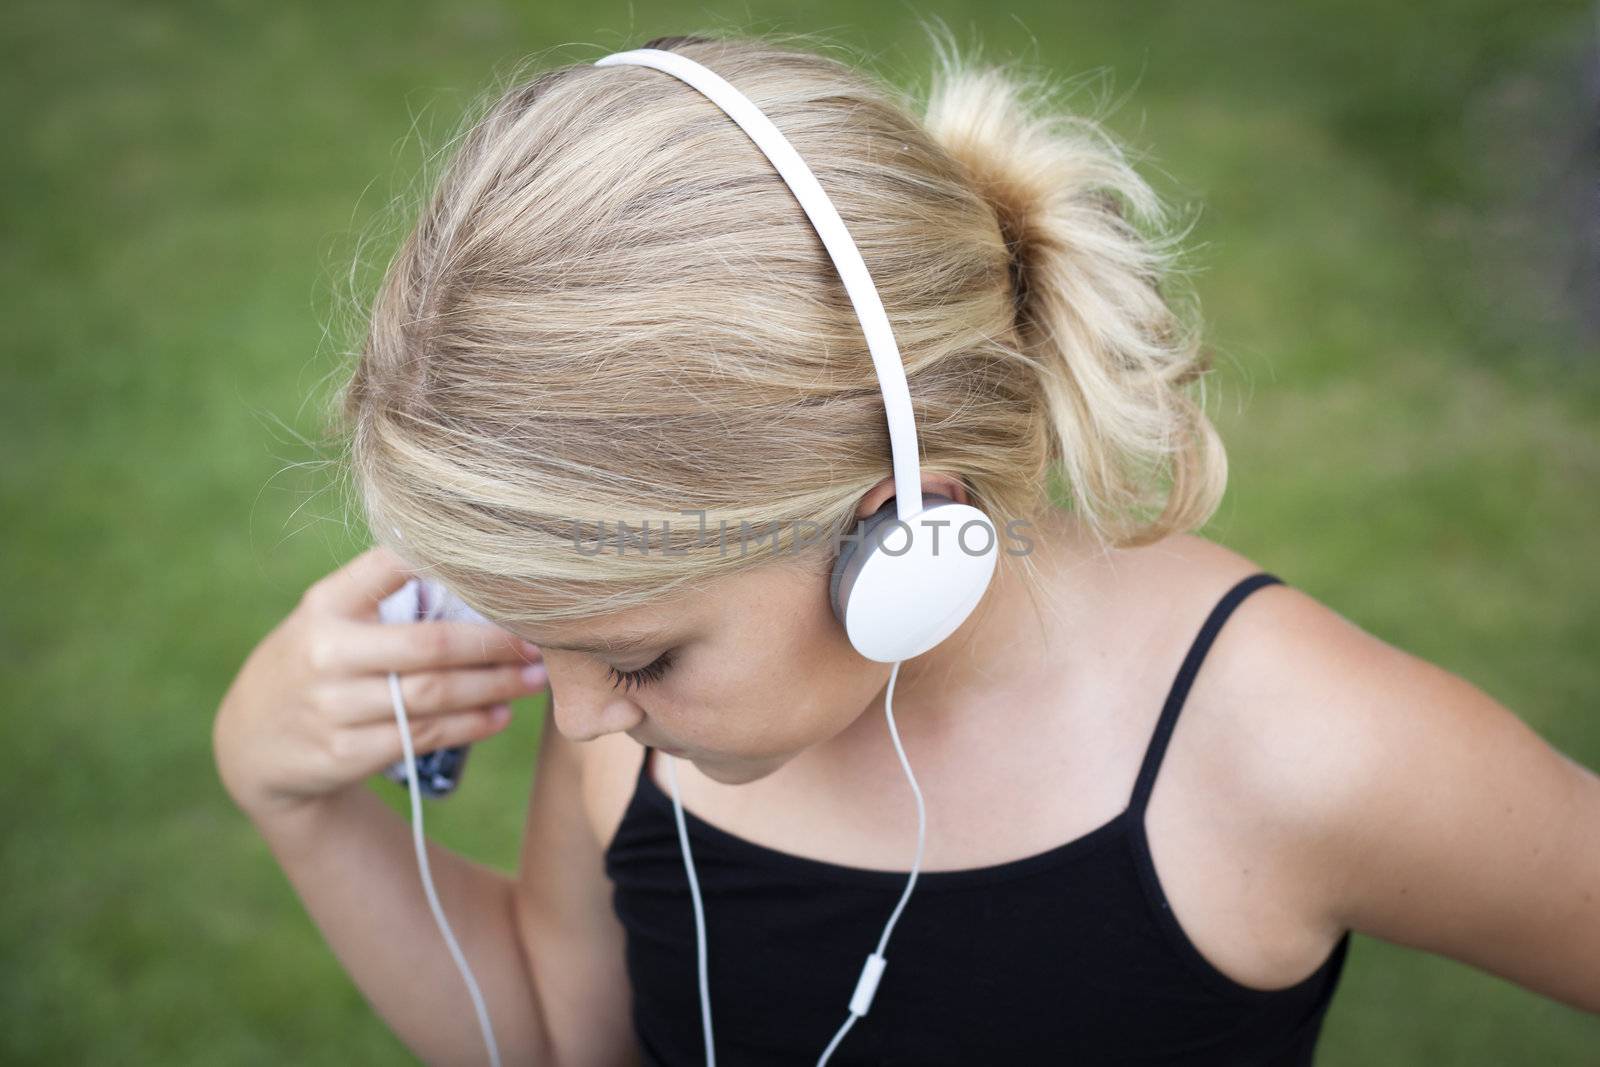 Child with headset listening to music on her smartphone. Short depth of field